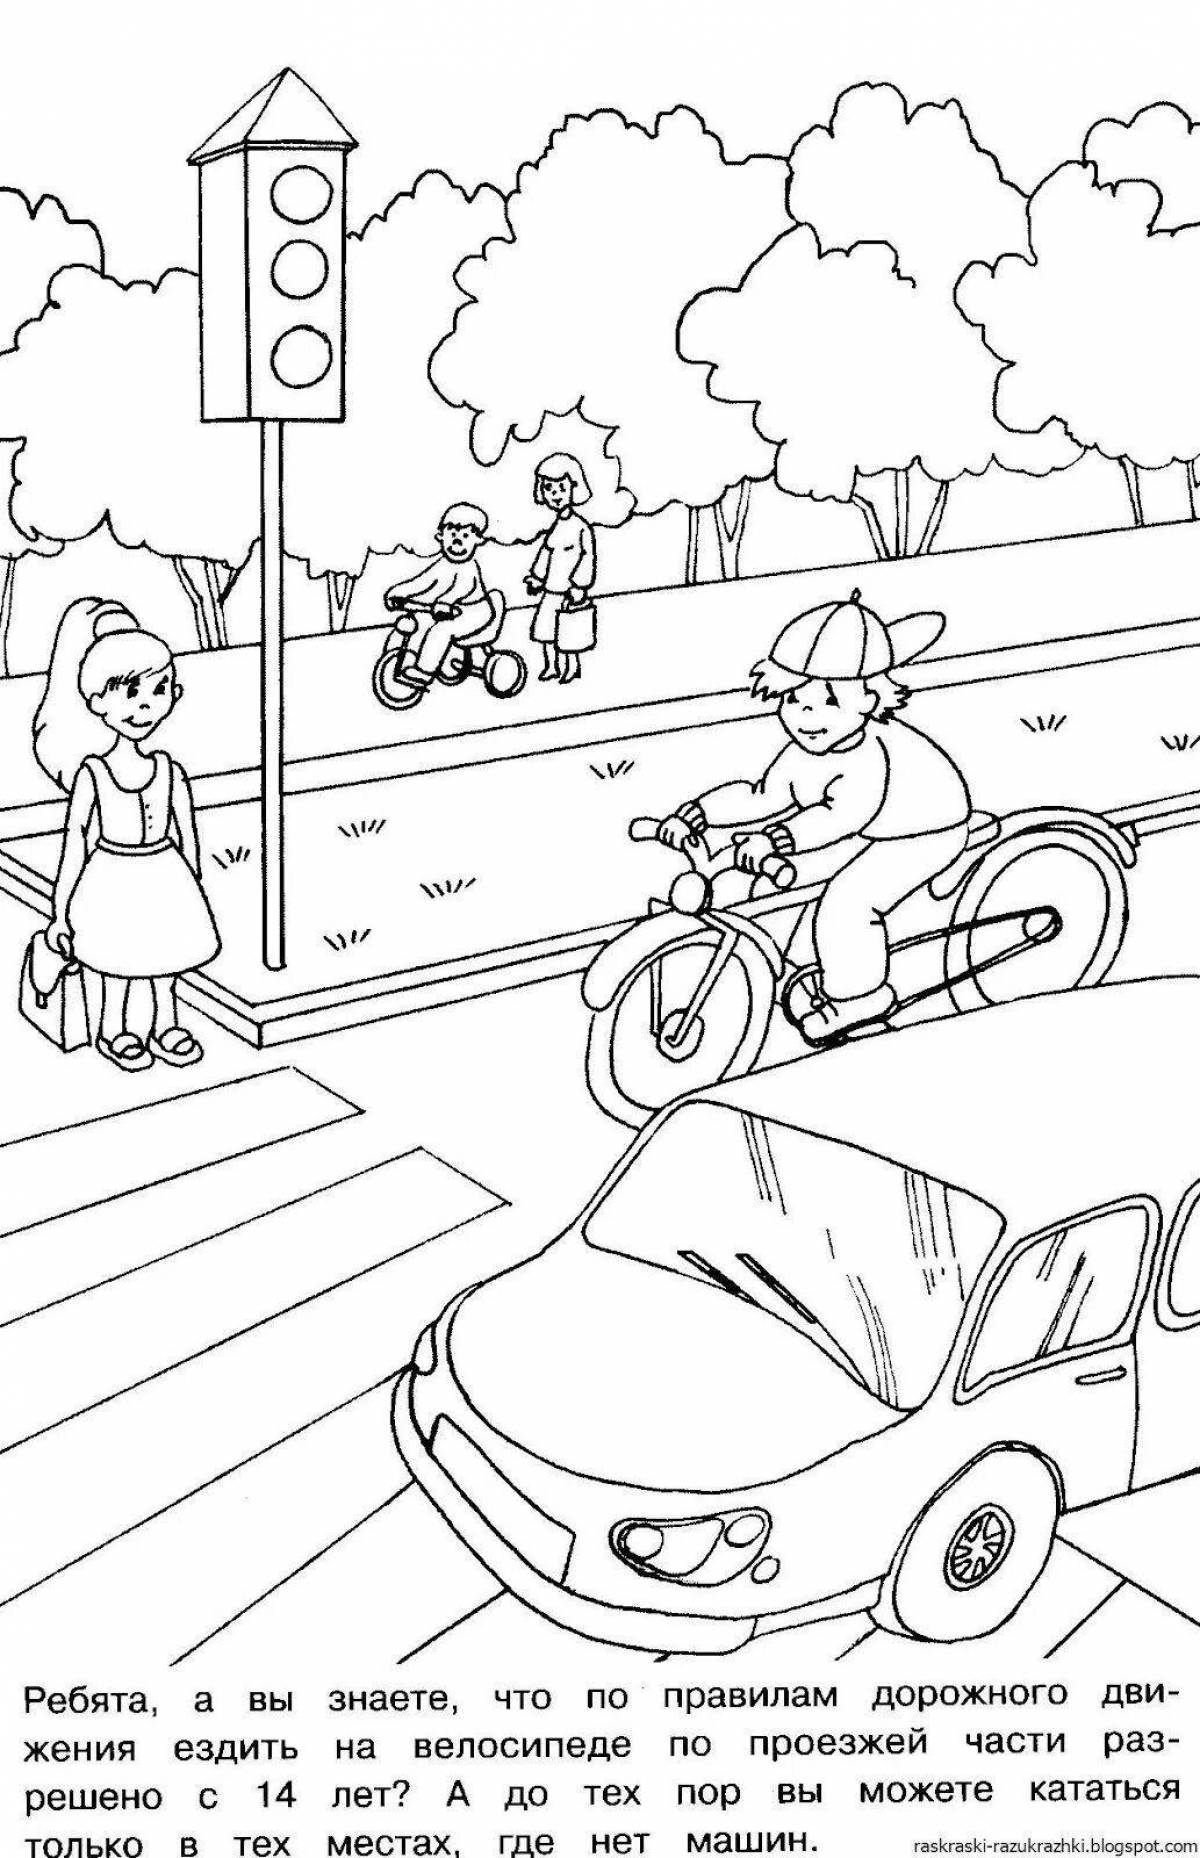 Exciting traffic safety coloring page